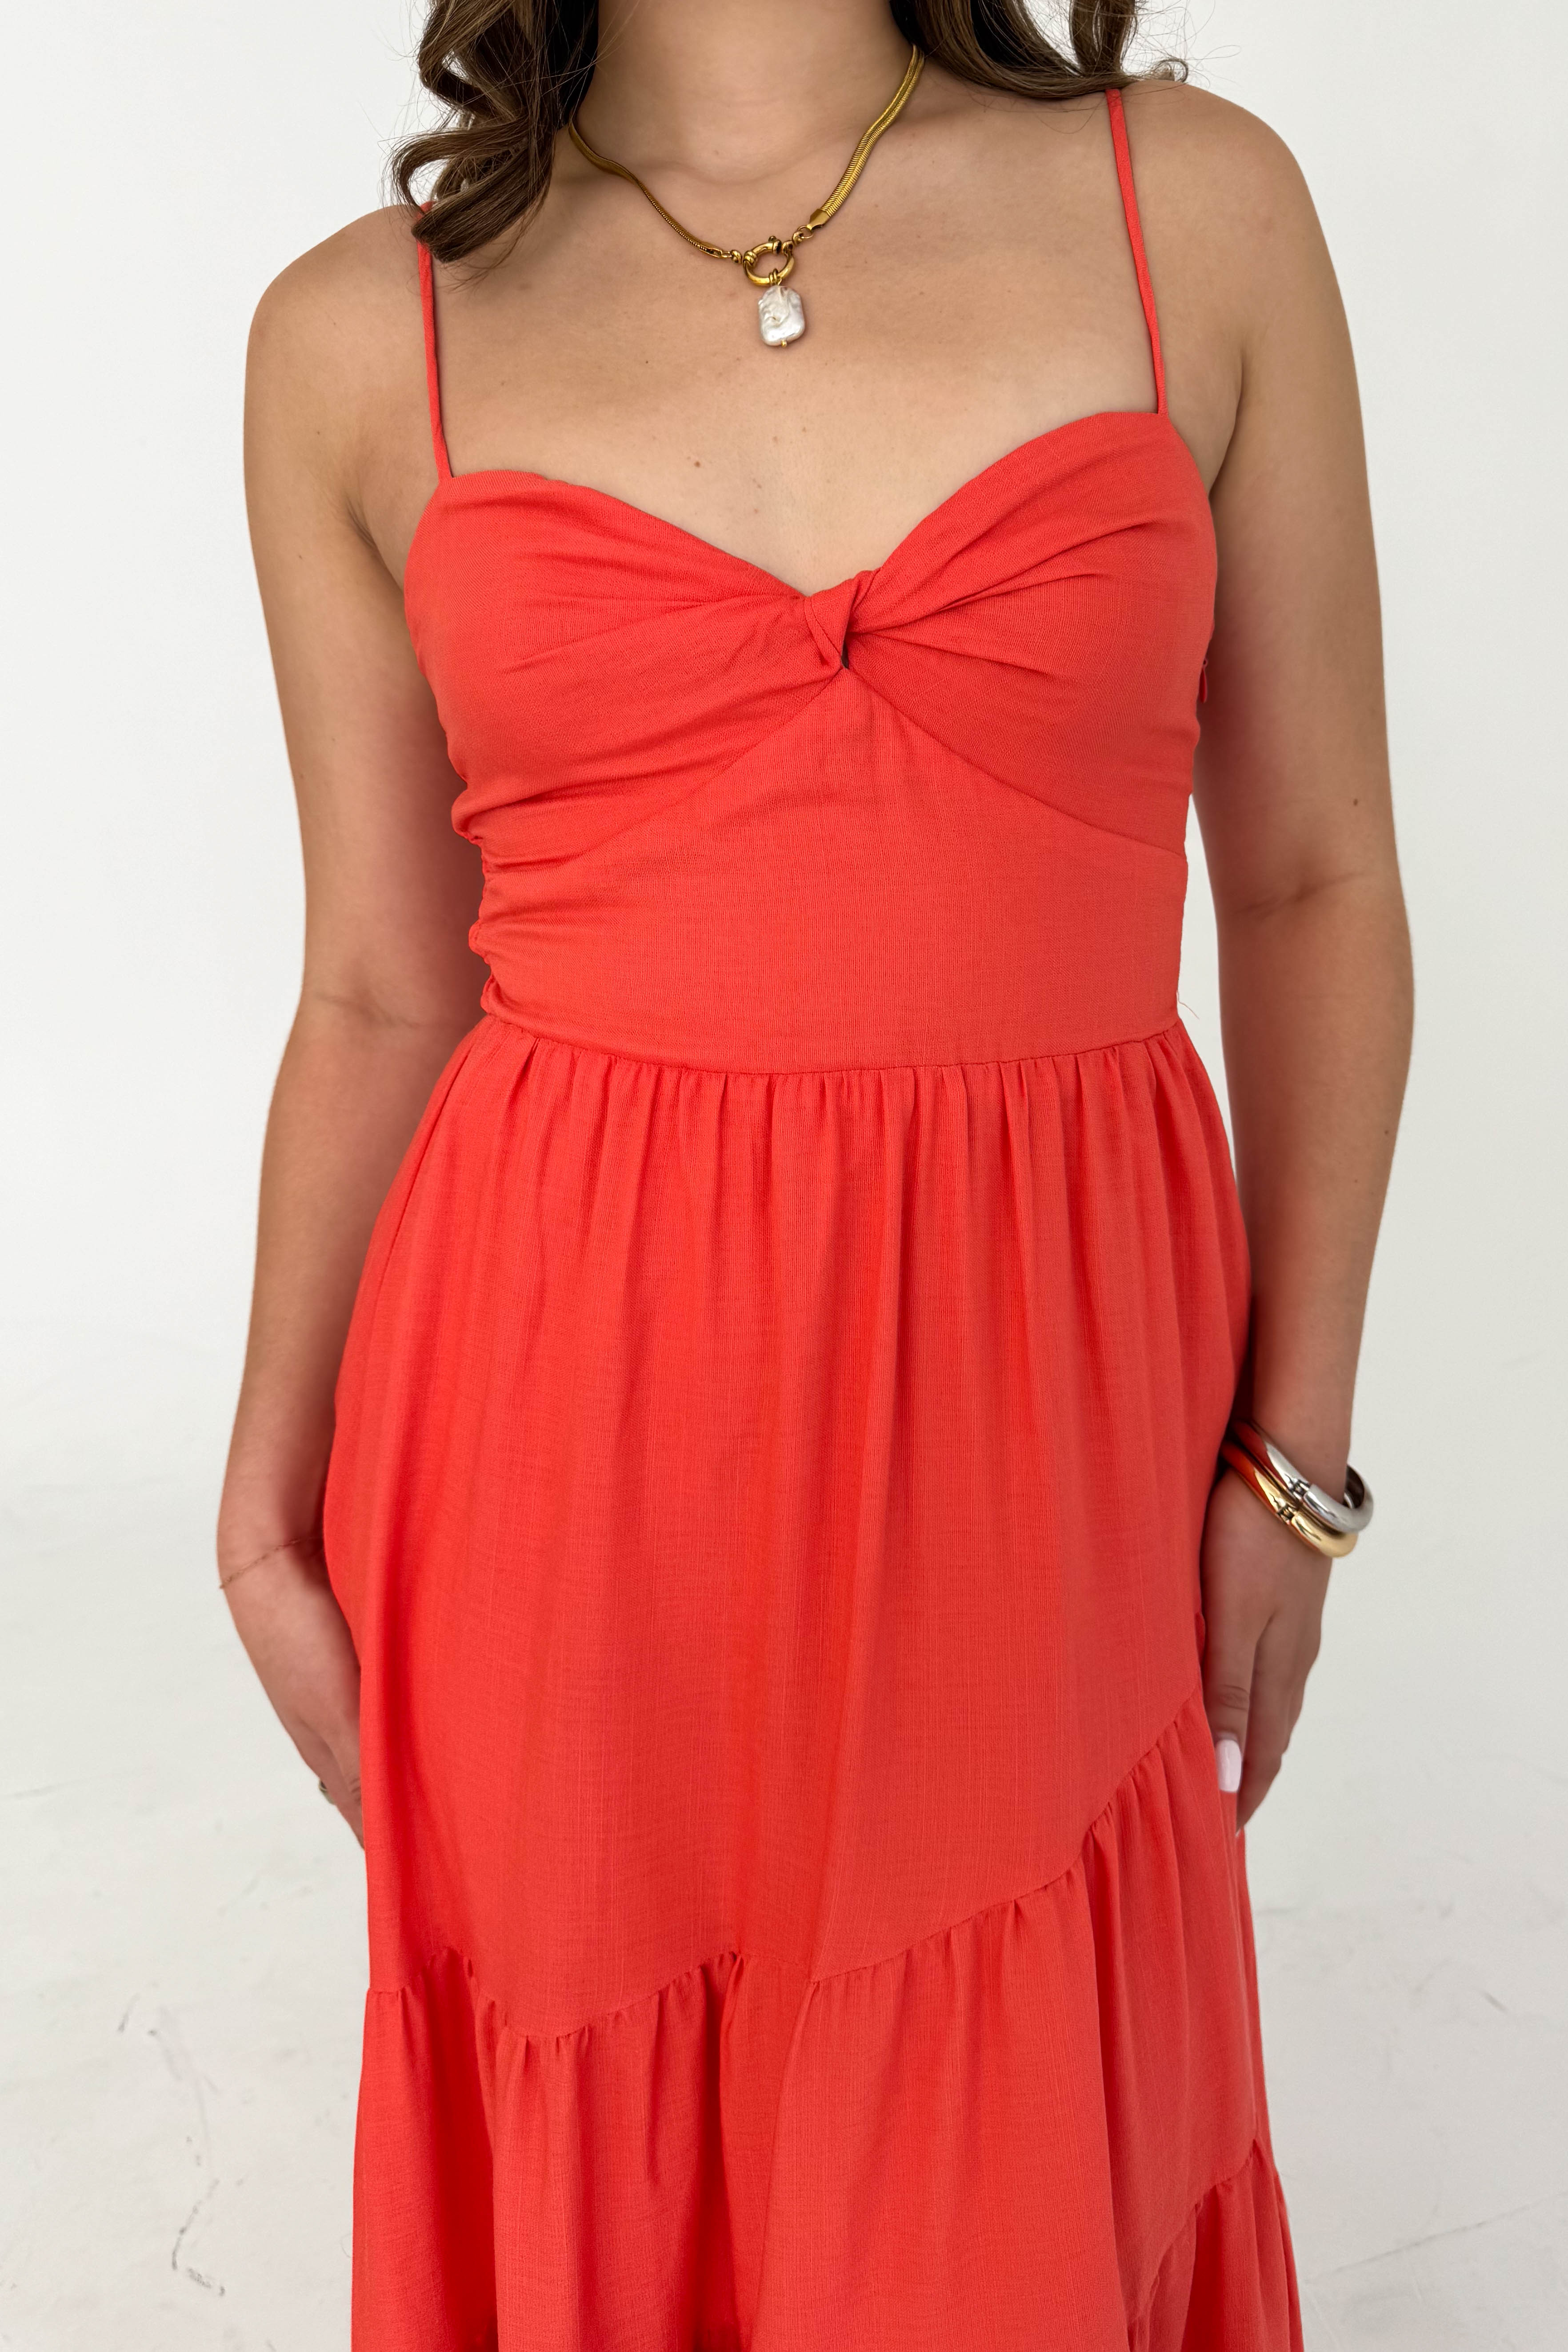 Catching Feelings Dress in Coral